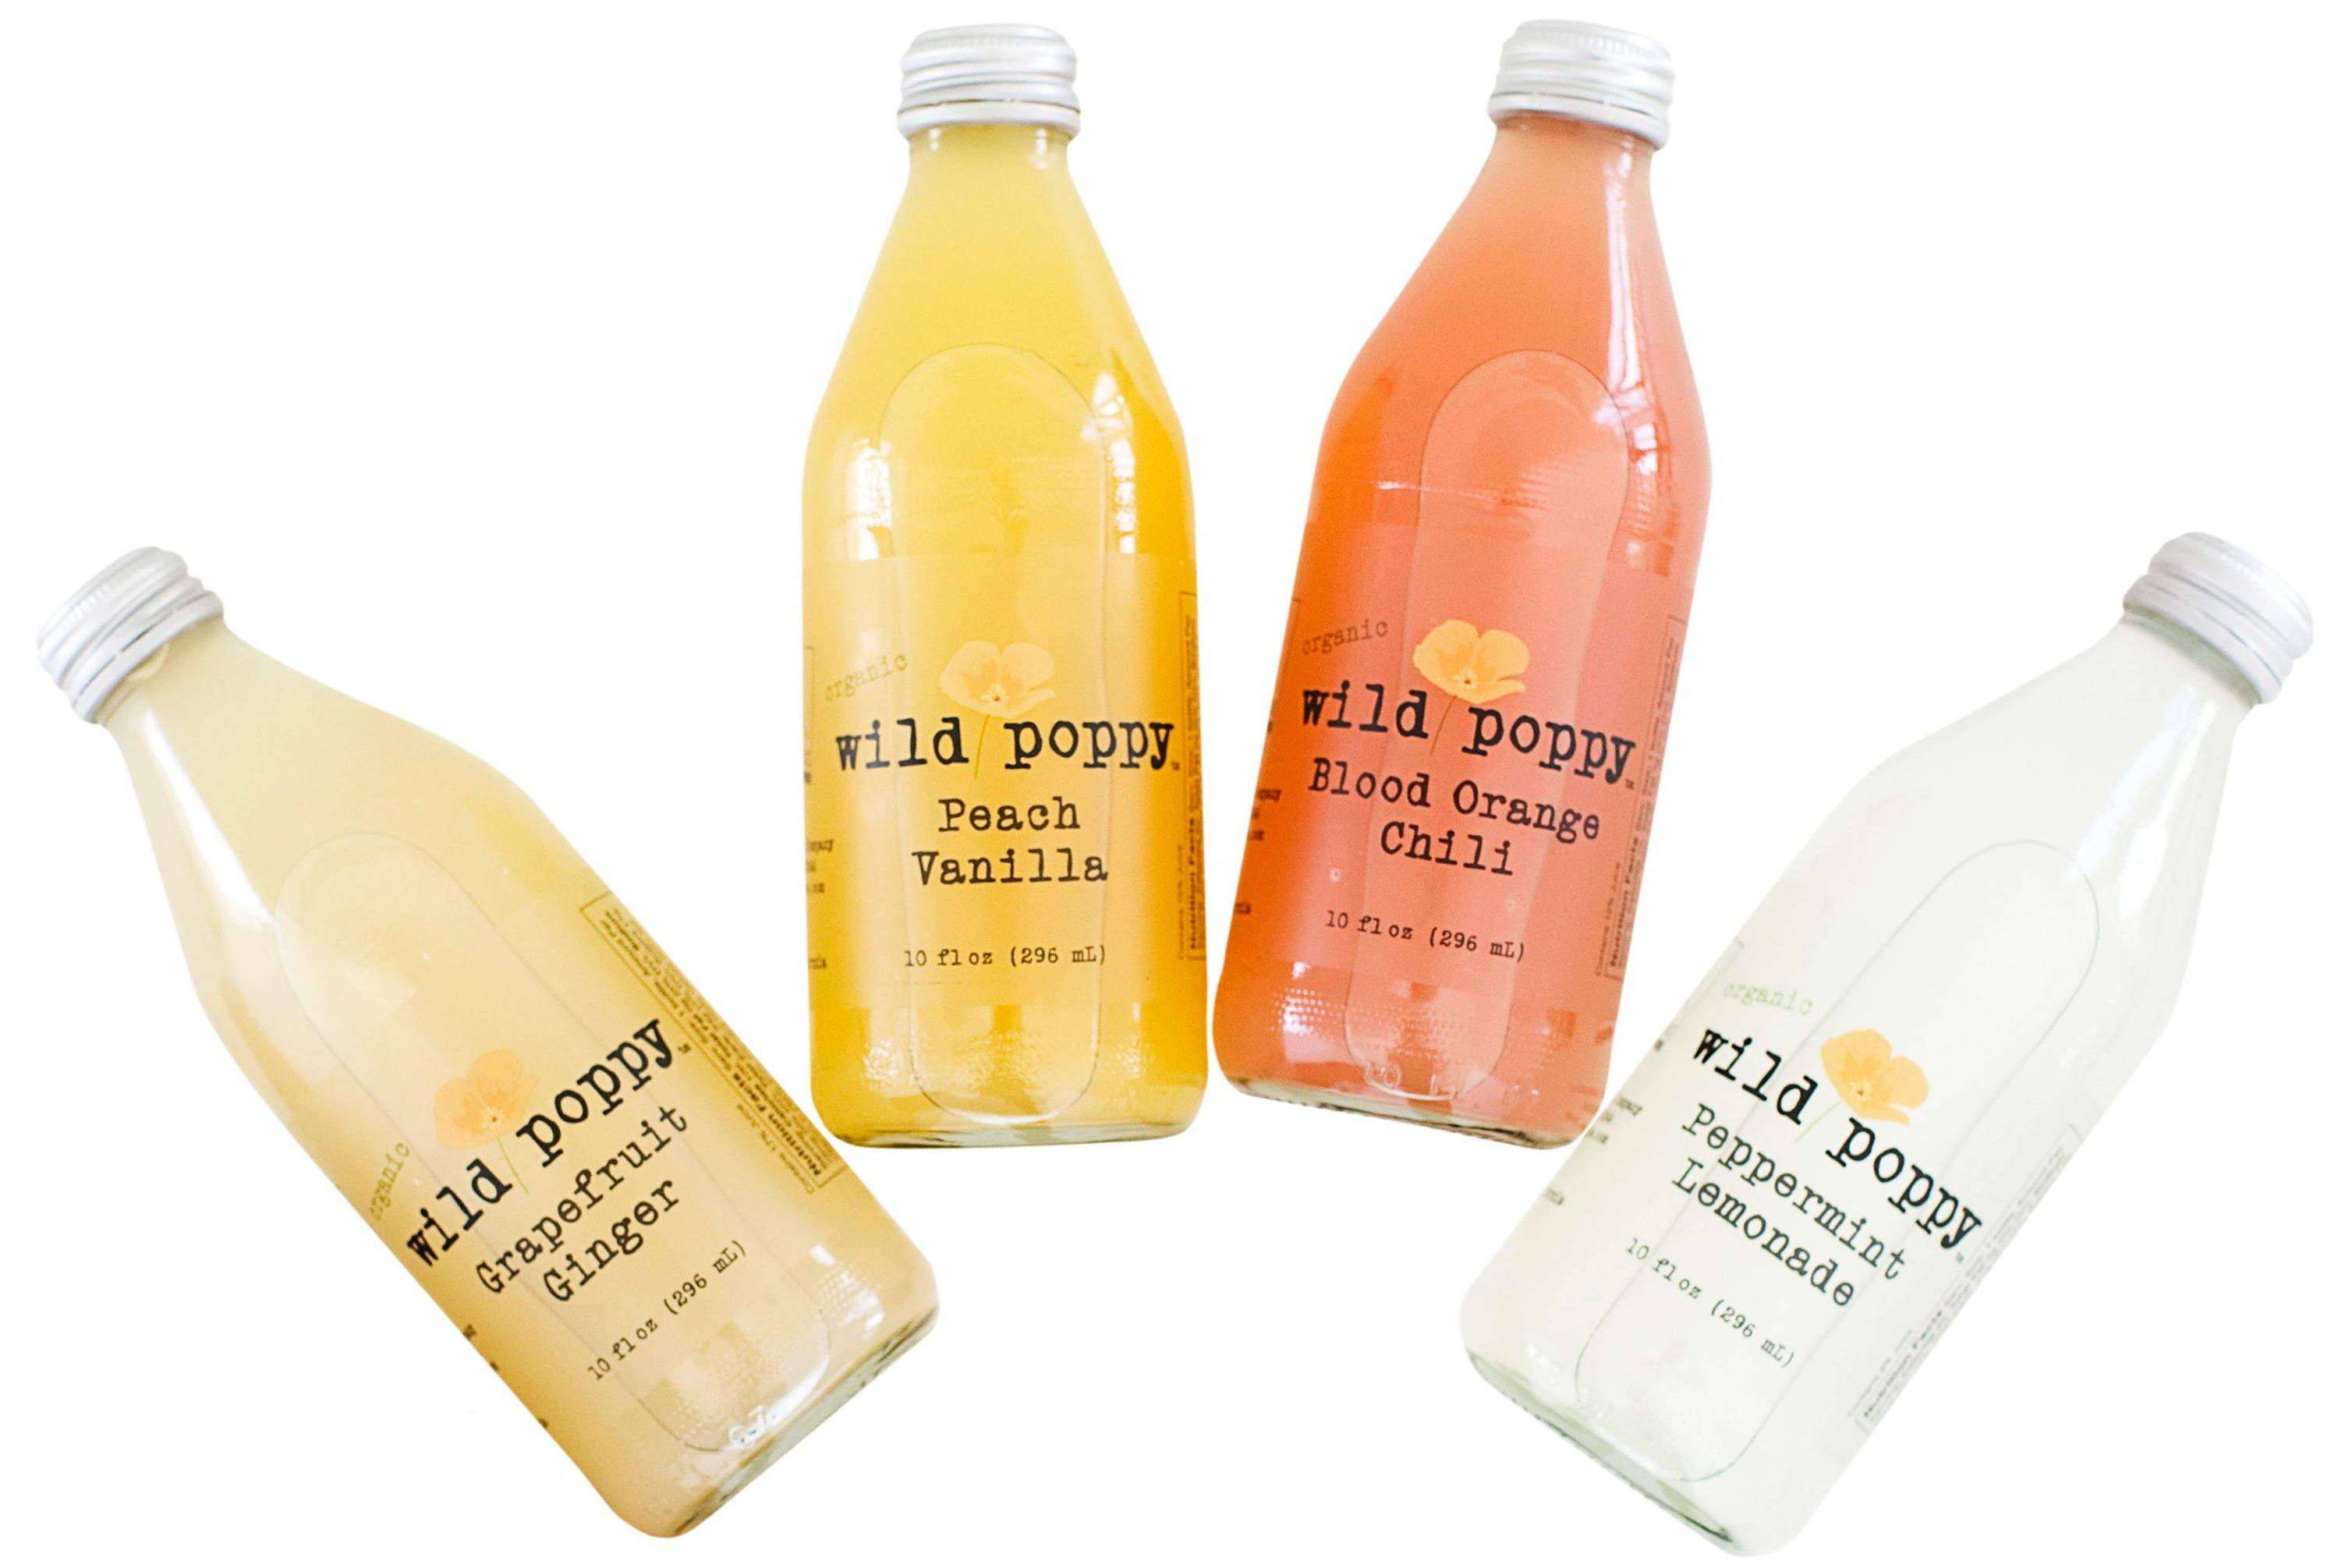 Wild Poppy Juice is available at Target in four unique flavor combinations.